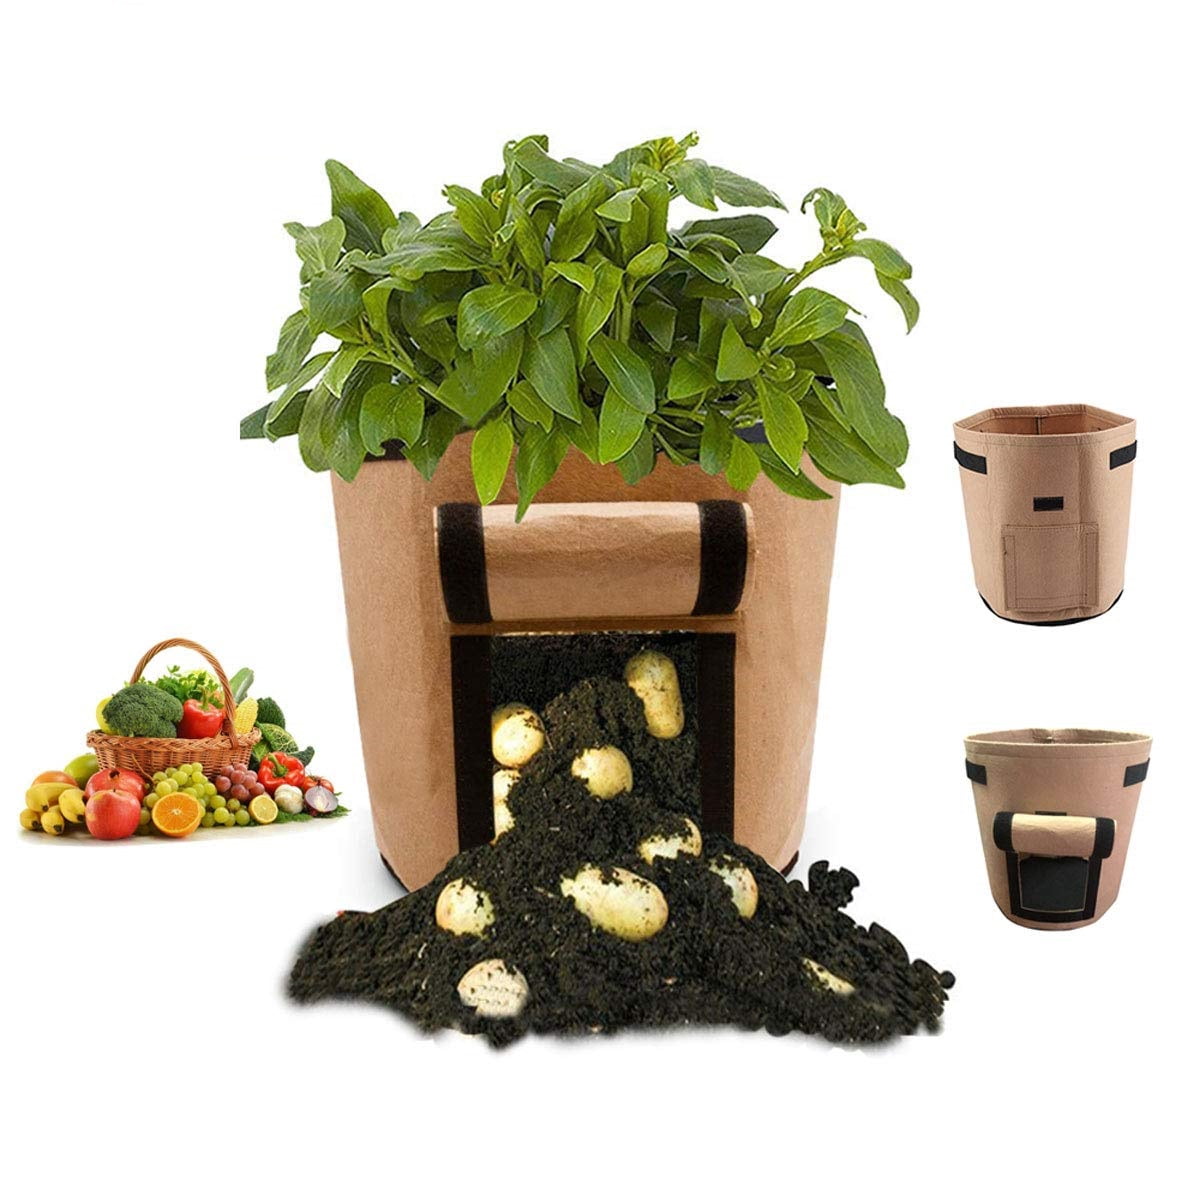 Details about   Gallons Potato Planting Grow Bags Planter Garden Flower Vegetable Container 1-20 